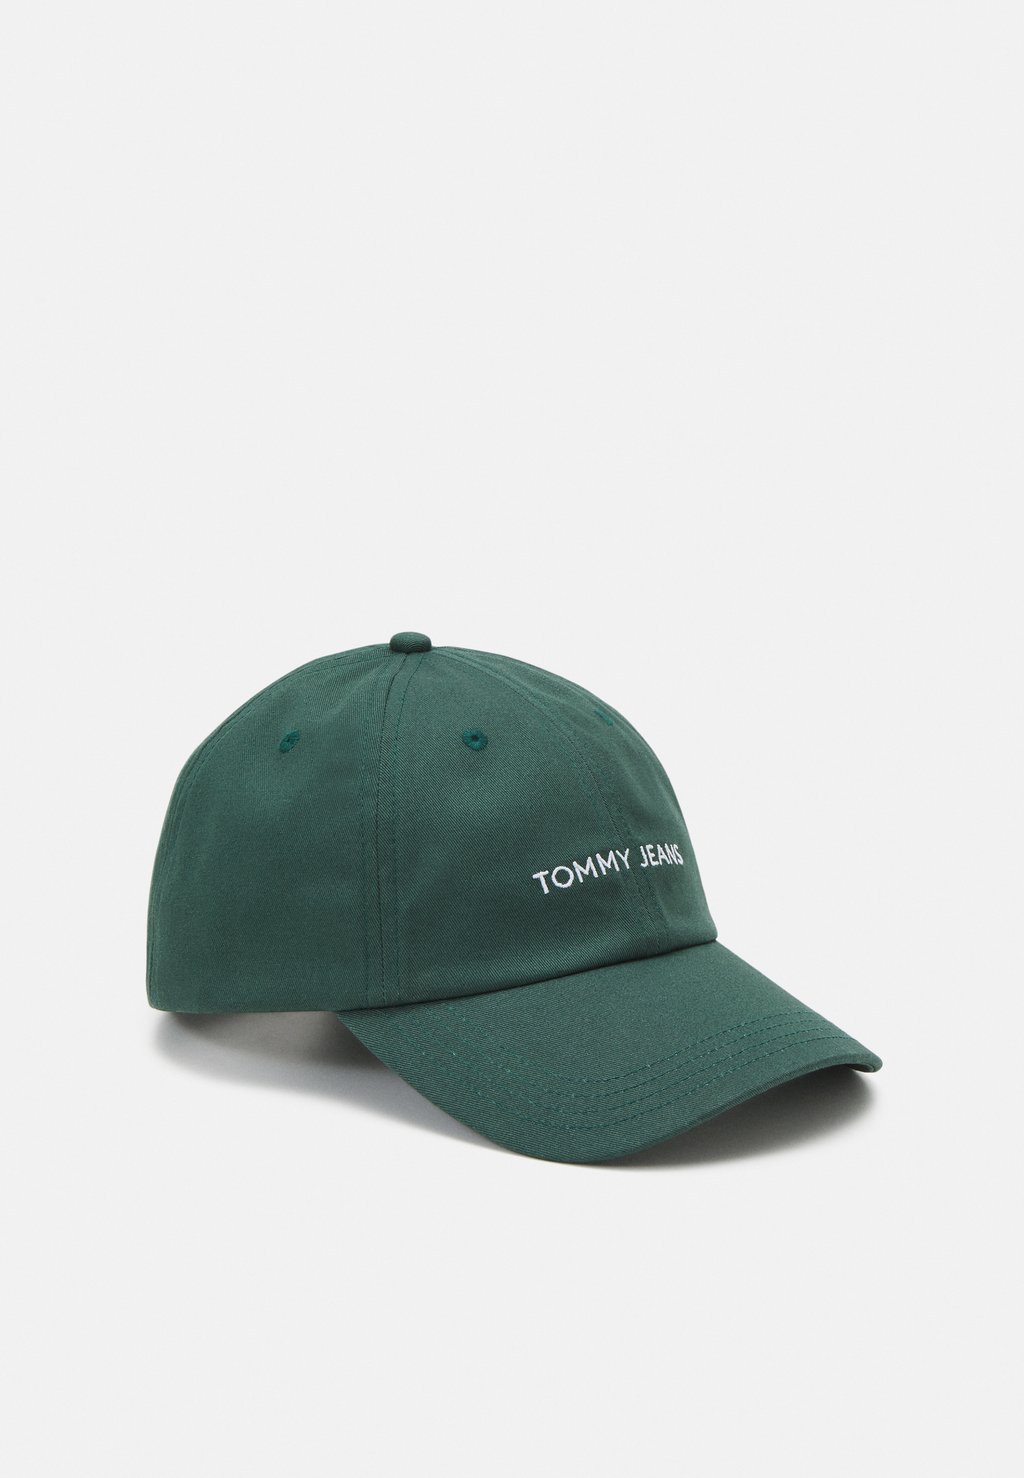 Бейсболка LINEAR LOGO UNISEX Tommy Jeans, цвет tahoe forest панама linear logo bucket hat unisex tommy jeans цвет denim